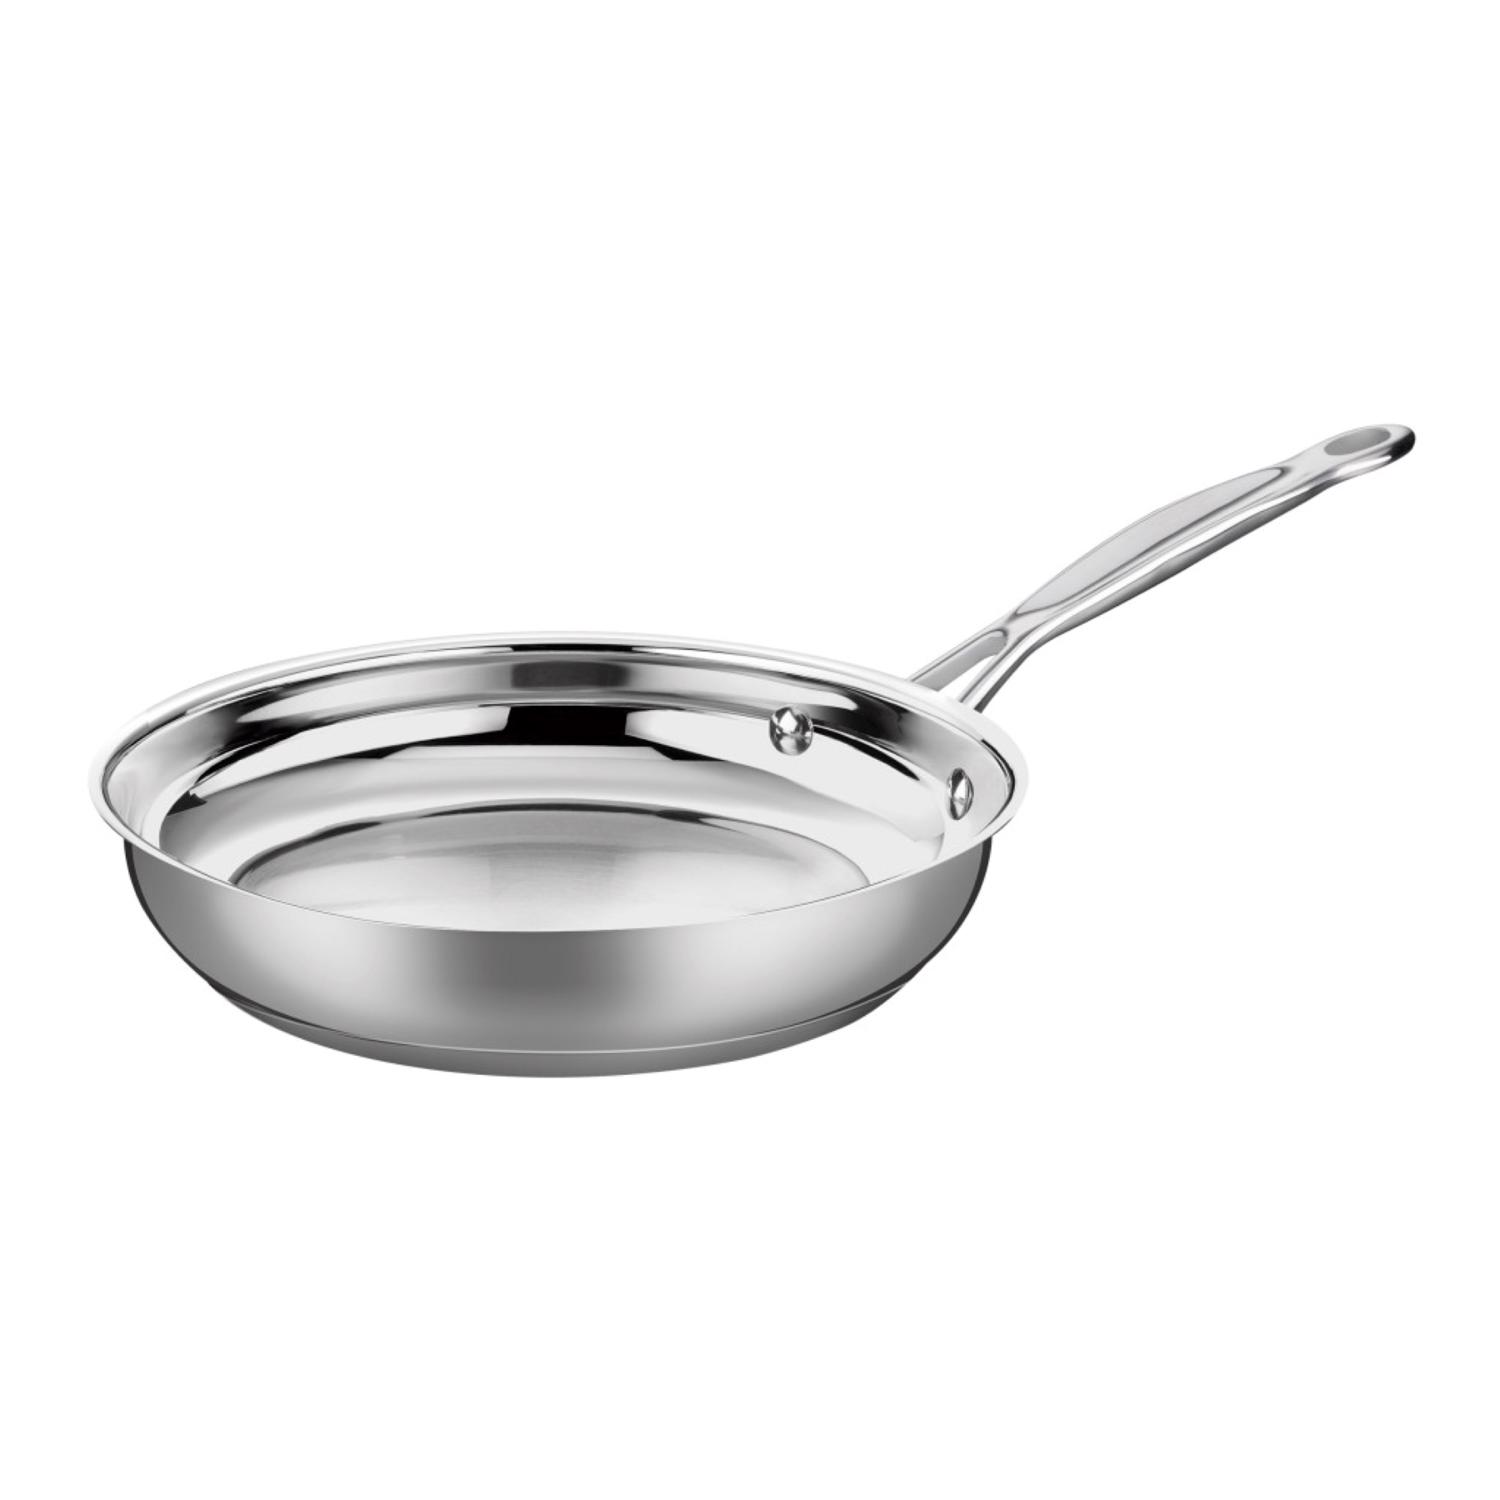 Photos - Other Accessories Cuisinart Chef's Classic Stainless Steel Skillet 10 in. Silver 722-24 